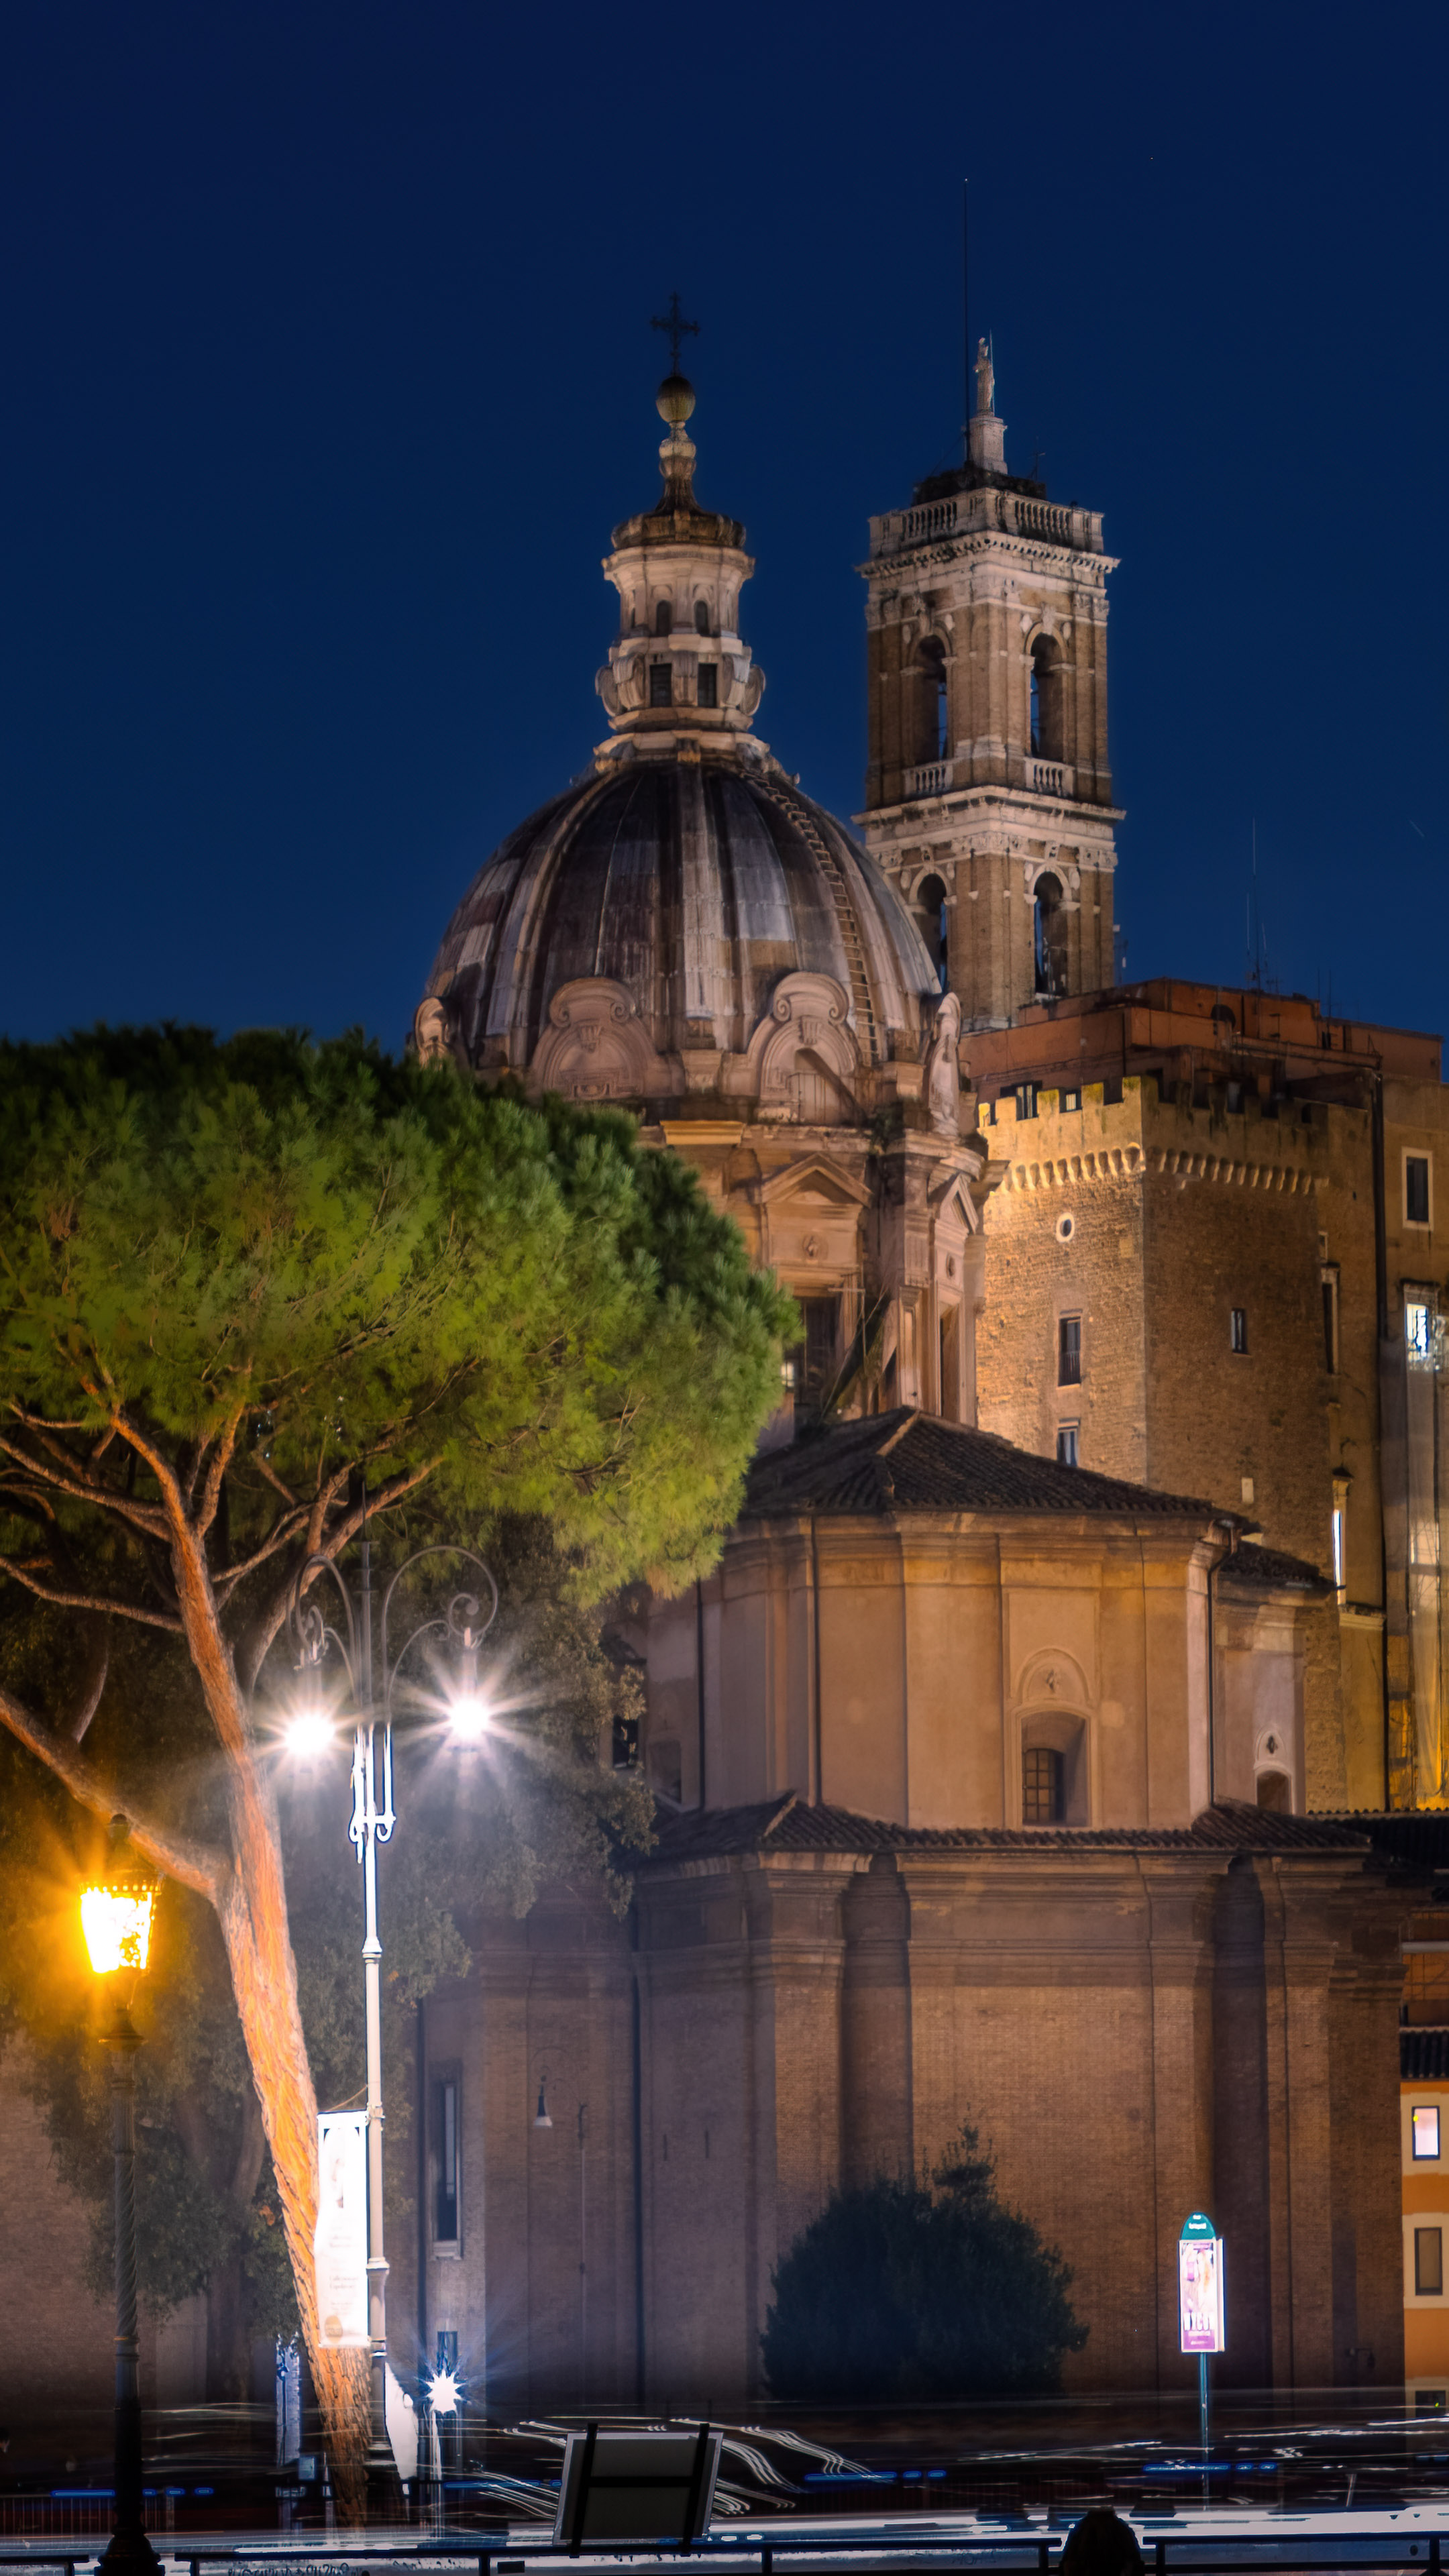 Experience the wonder of Rome's iconic landmarks at night with this stunning wallpaper.